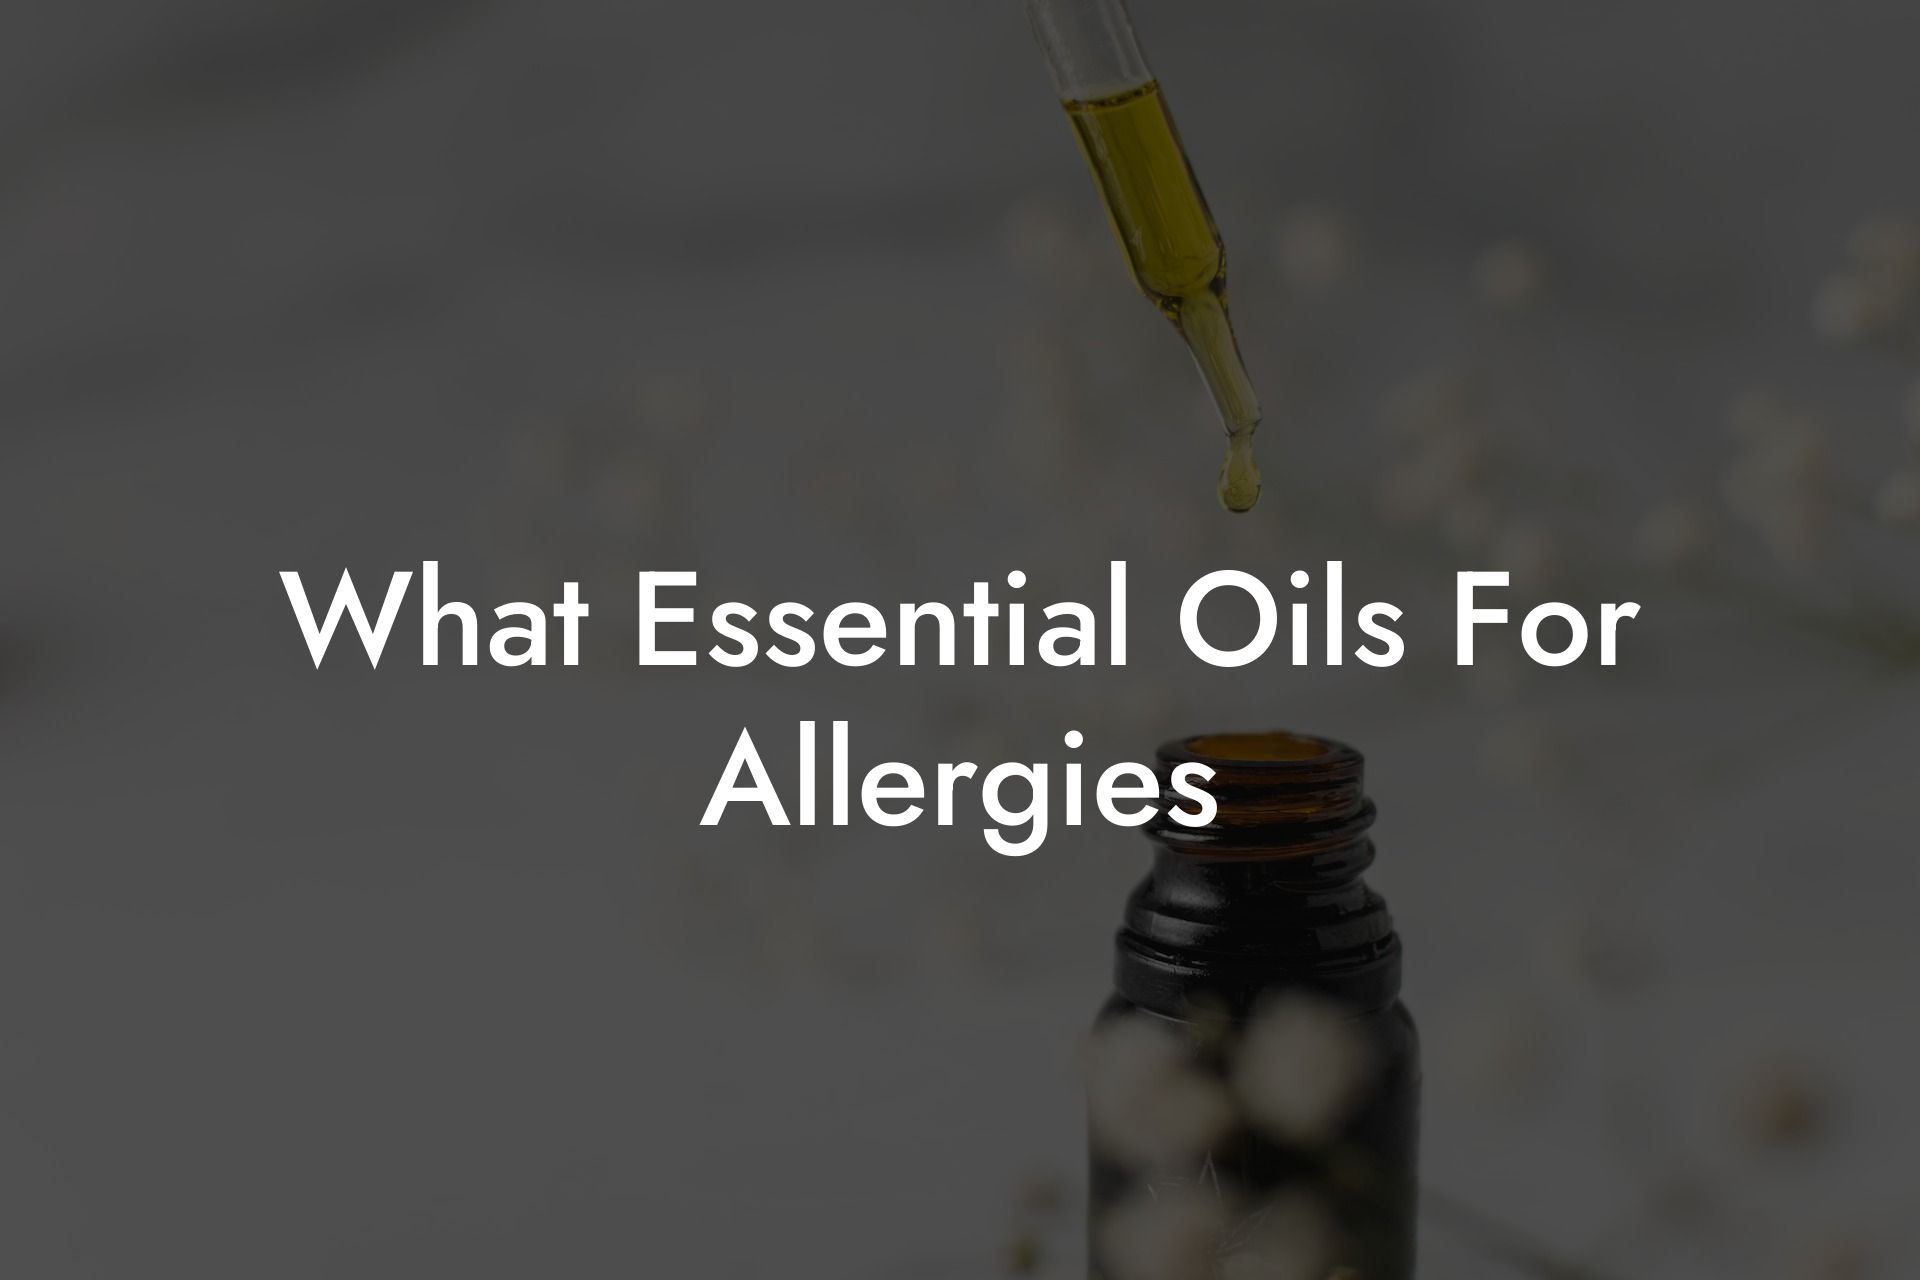 What Essential Oils For Allergies